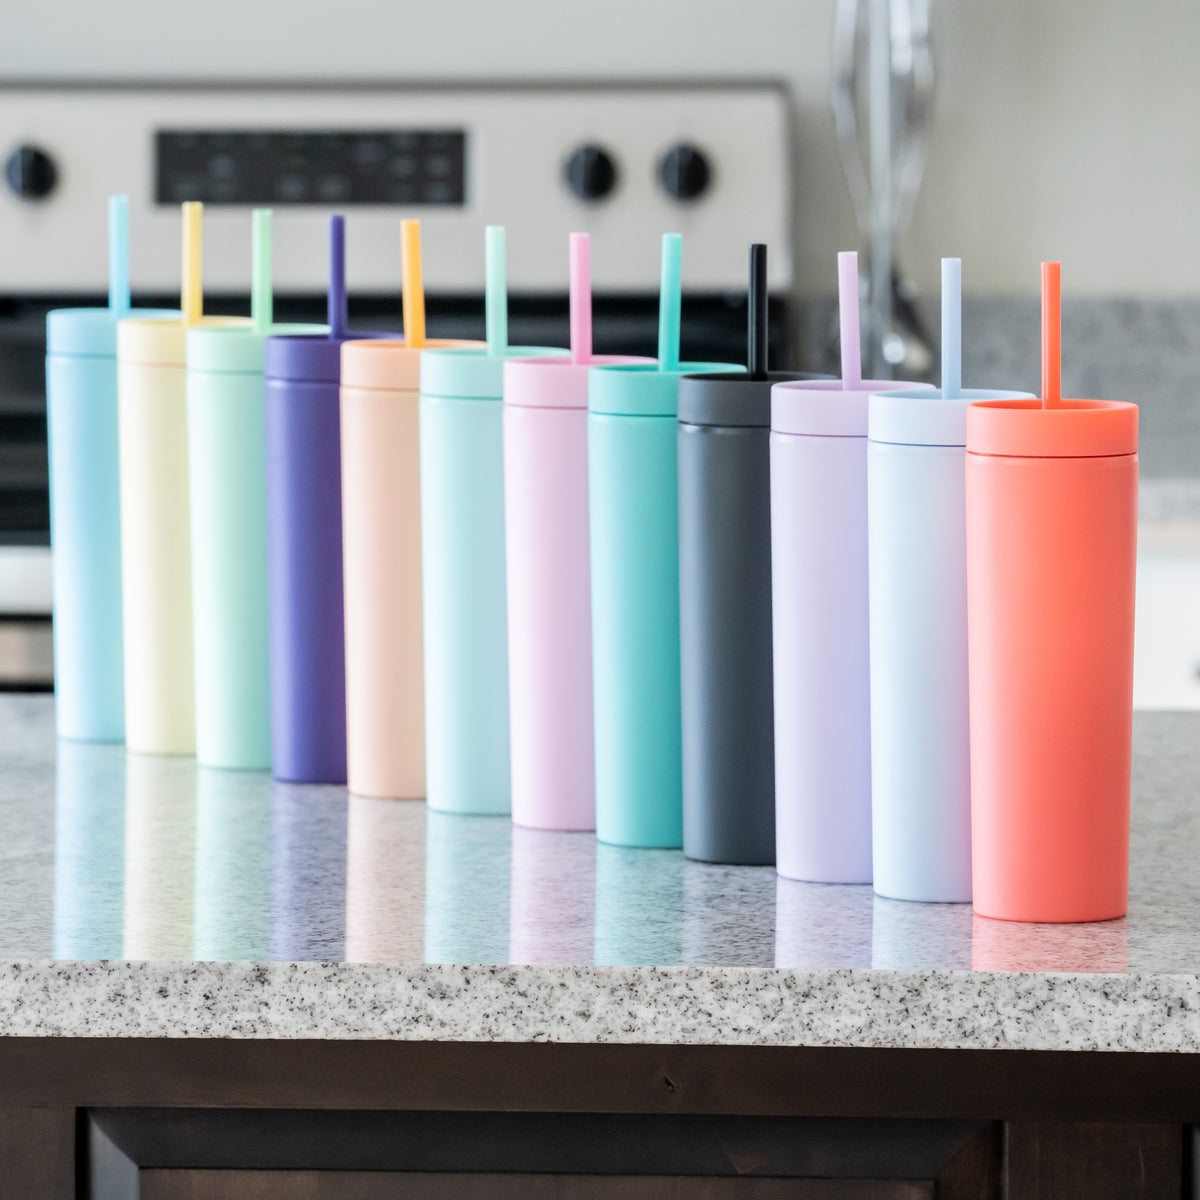 STRATA CUPS Multicolor Skinny Tumblers with Lids and Straws (4 pack) - 16oz  Matte Pastel Colored Acr…See more STRATA CUPS Multicolor Skinny Tumblers